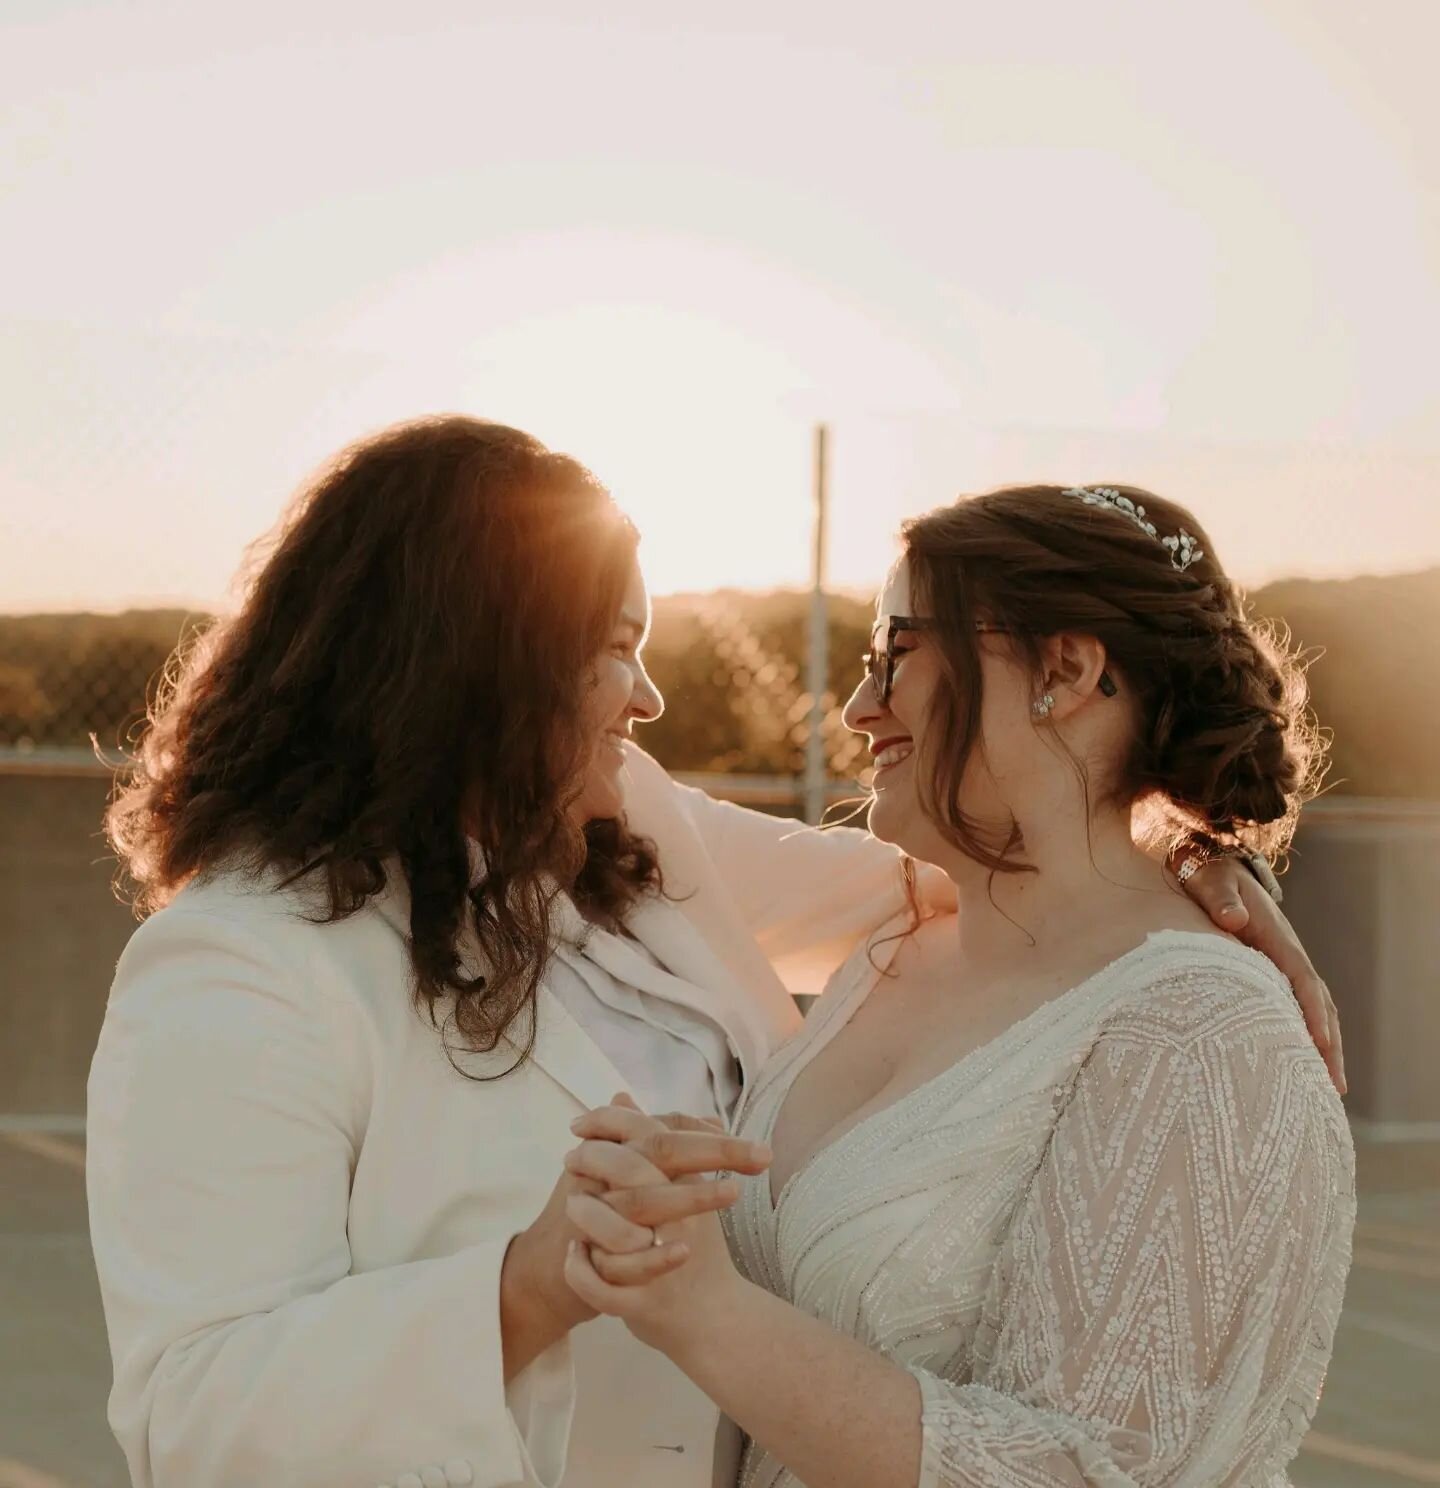 Love is love, and at Gals &amp; Ghouls, we believe that everyone deserves to feel beautiful and confident on their special day as well as be treated with kidness and respect. ❤️🌈

We had the honor of working with Stacey and Cat - their love is truly